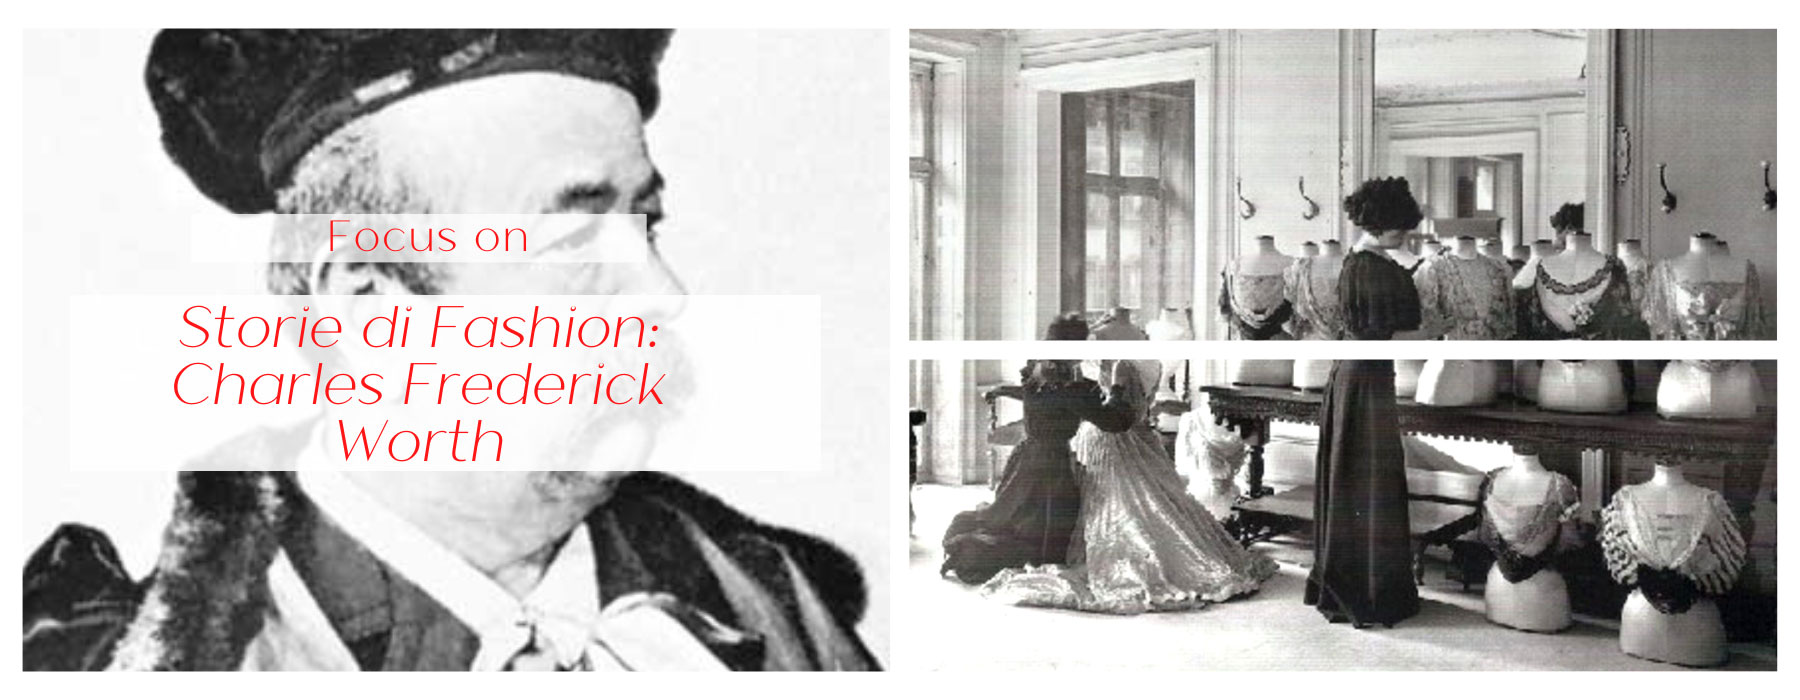 Storie di Fashion: Charles Frederick Worth